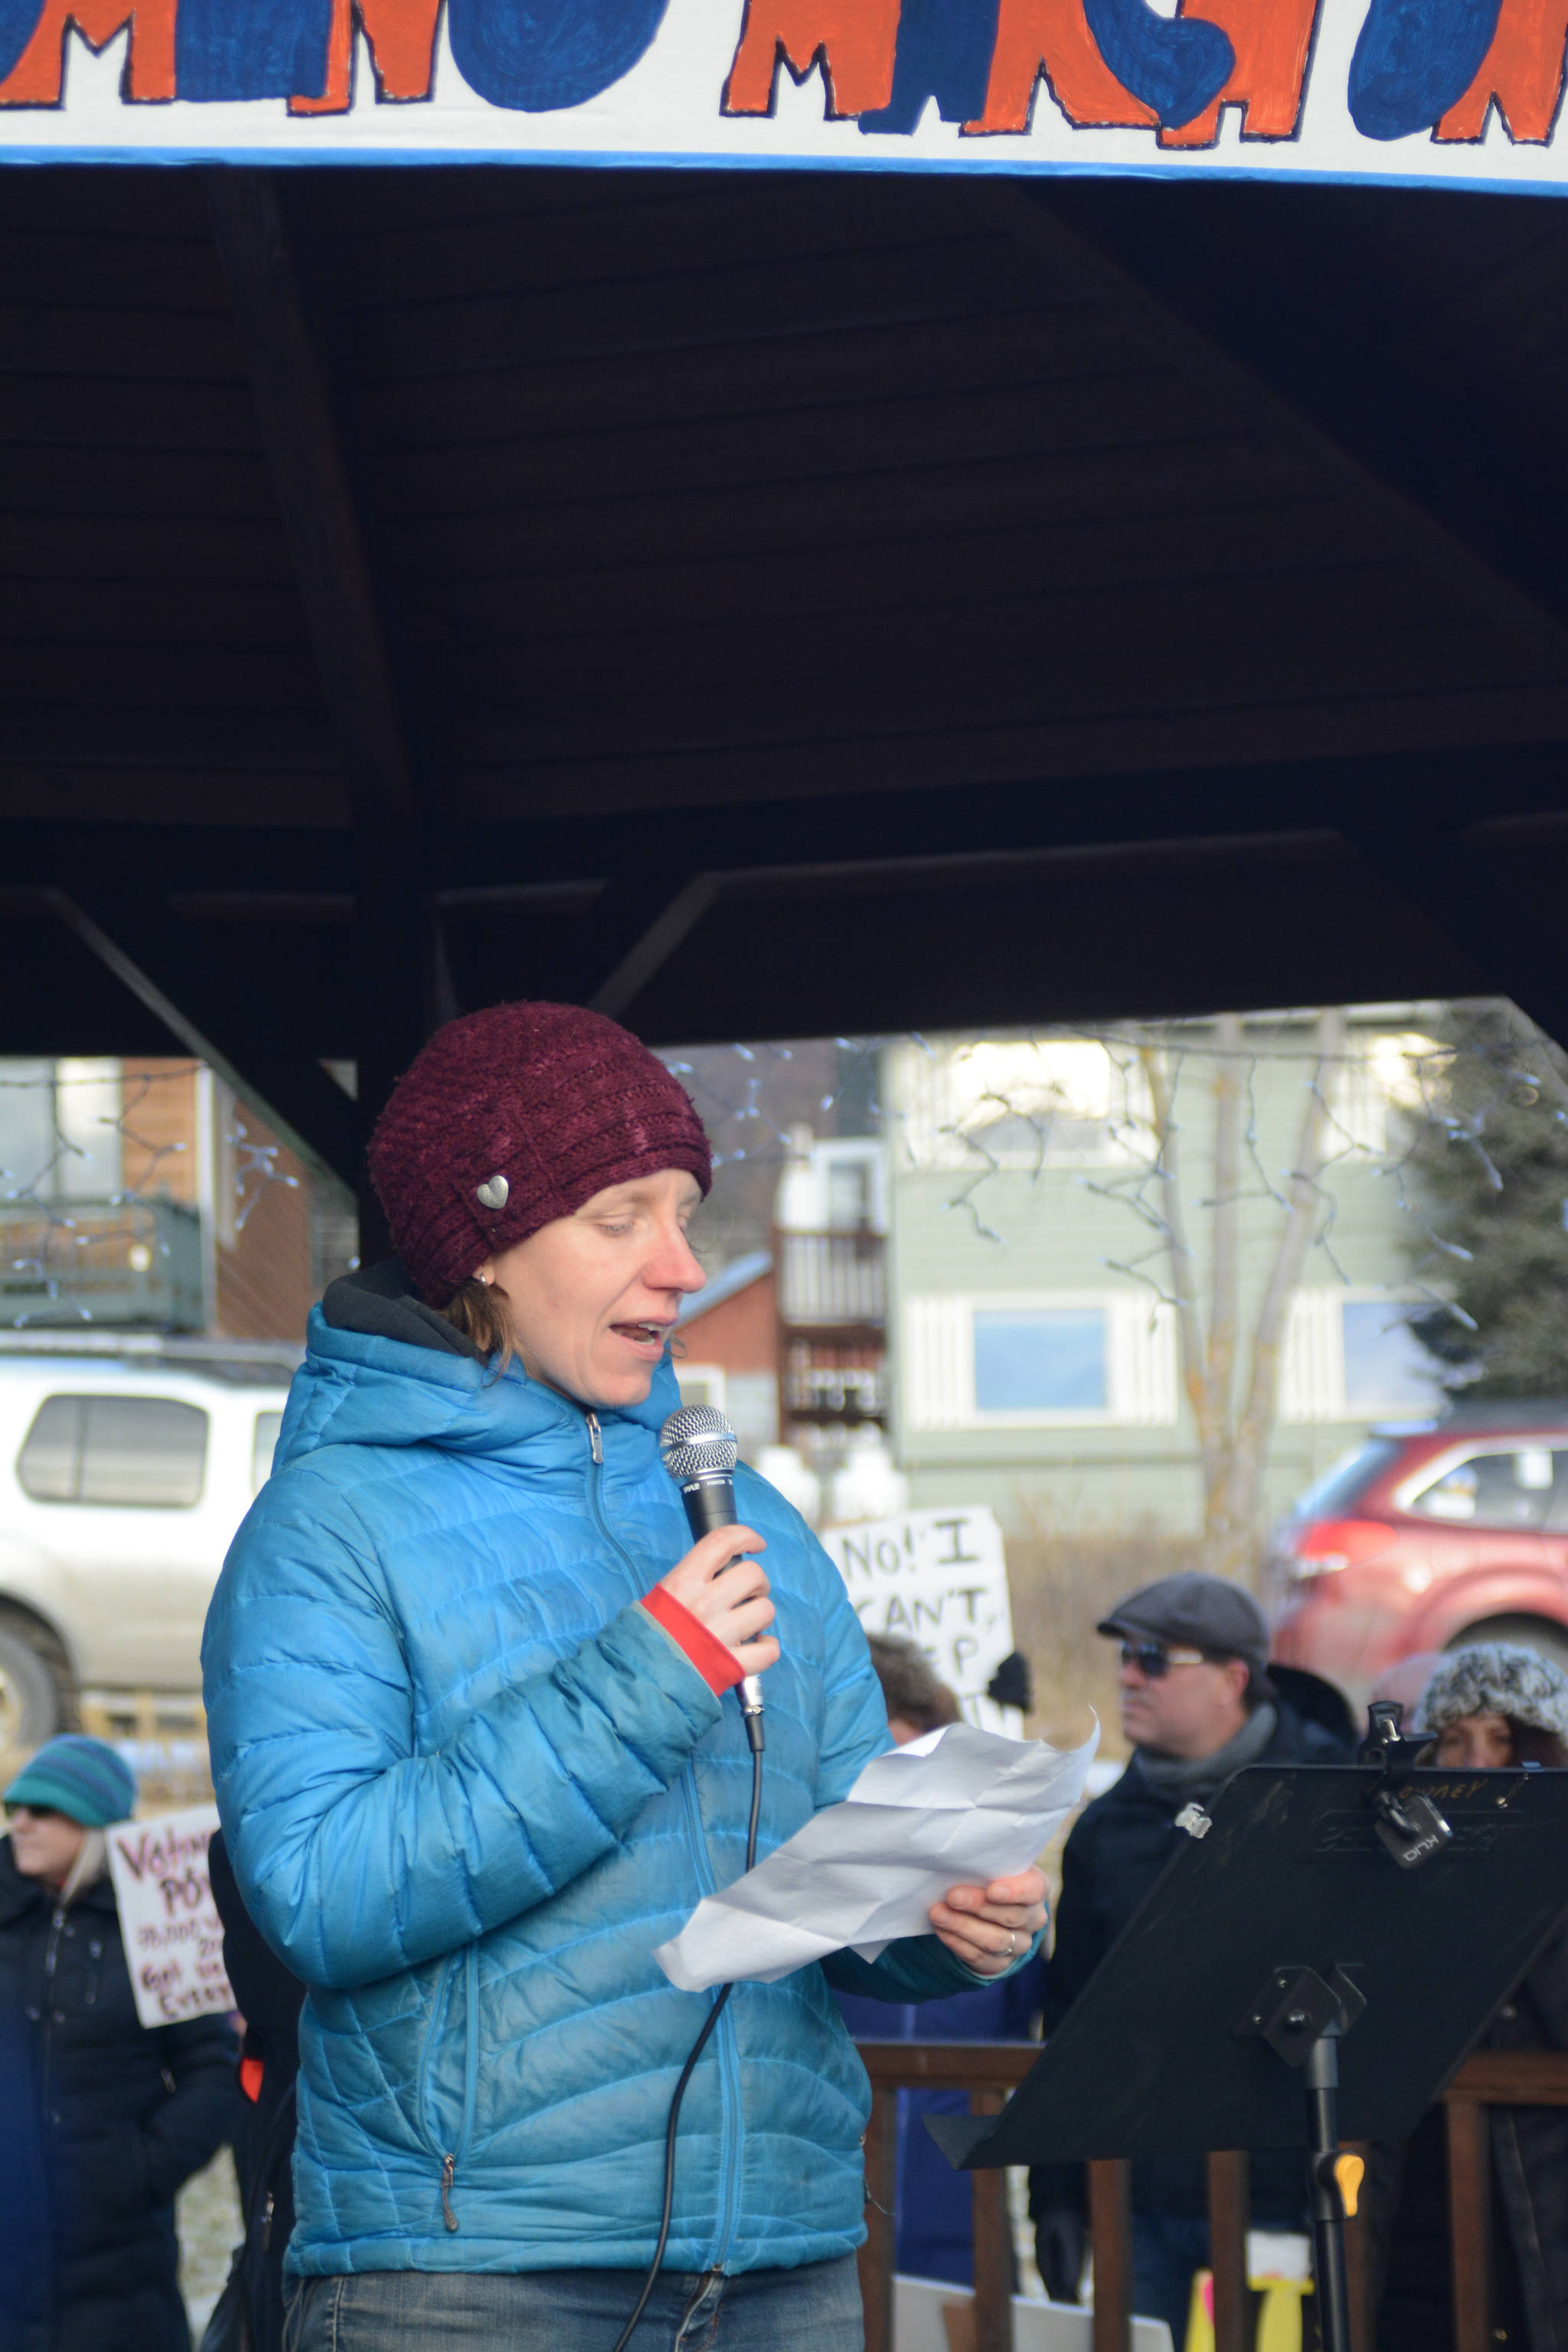 Homer City Council member Rachel Lord speaks at the Homer March for Women on Saturday. About 700 people walked in the march along Pioneer Avenue on Jan. 20, 2018, in Homer, Alaska. The line of marchers extended from Main Street to Kachemak Way. (Photo by Michael Armstrong/Homer News)